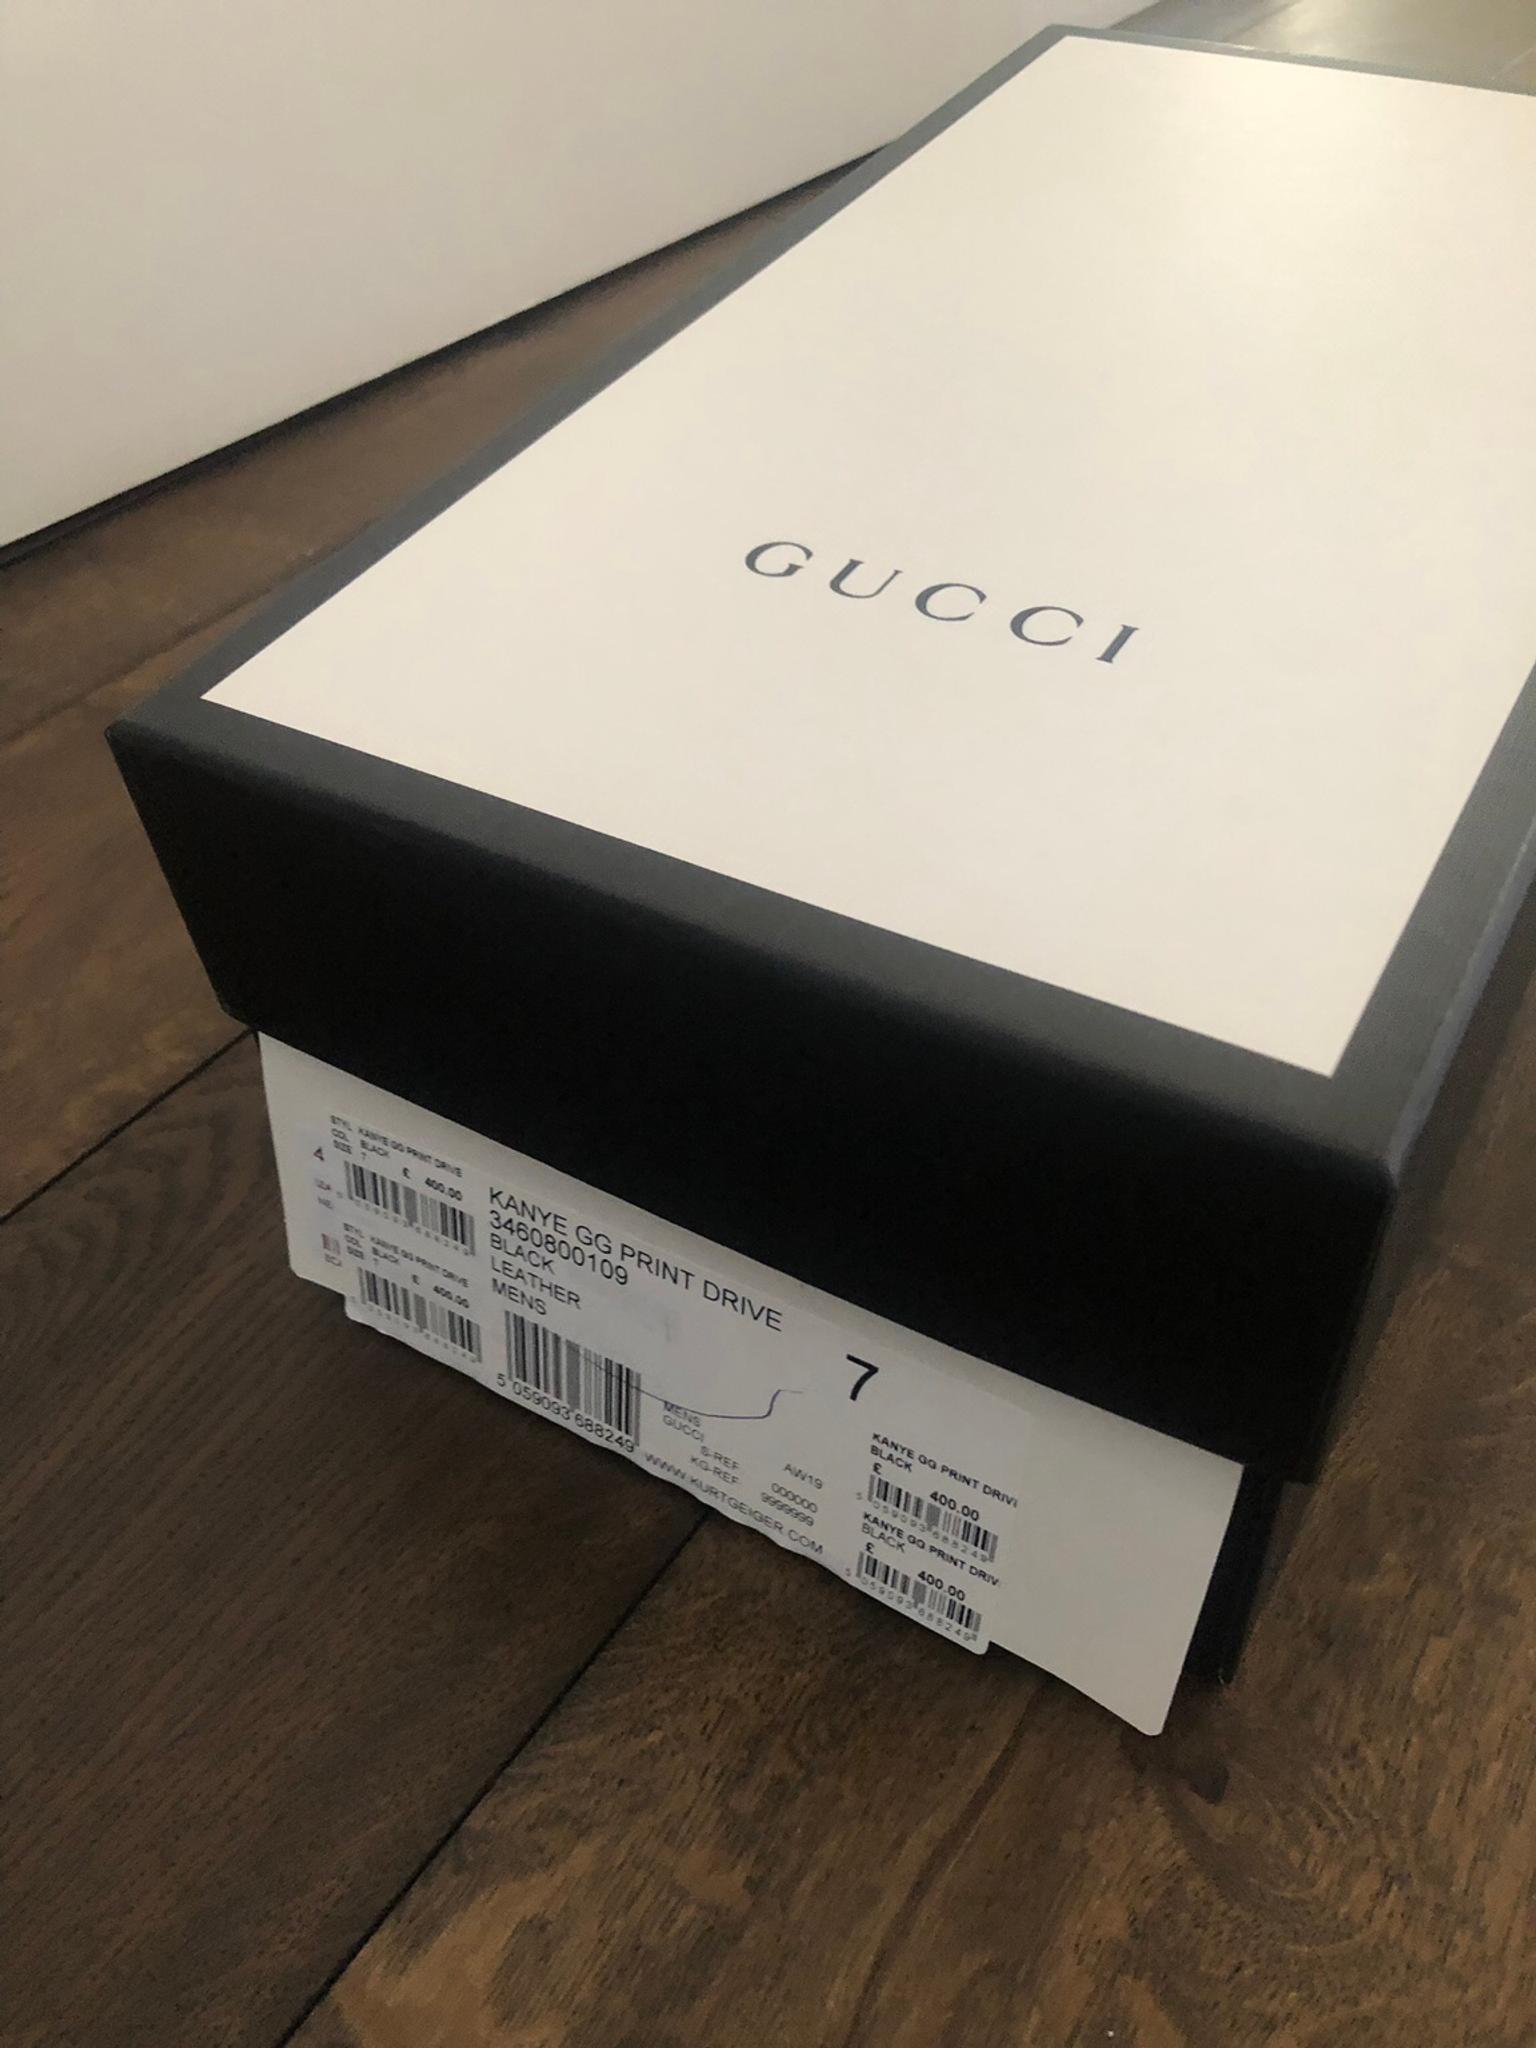 Gucci shoe box in SE1 London for £10.00 for sale Shpock